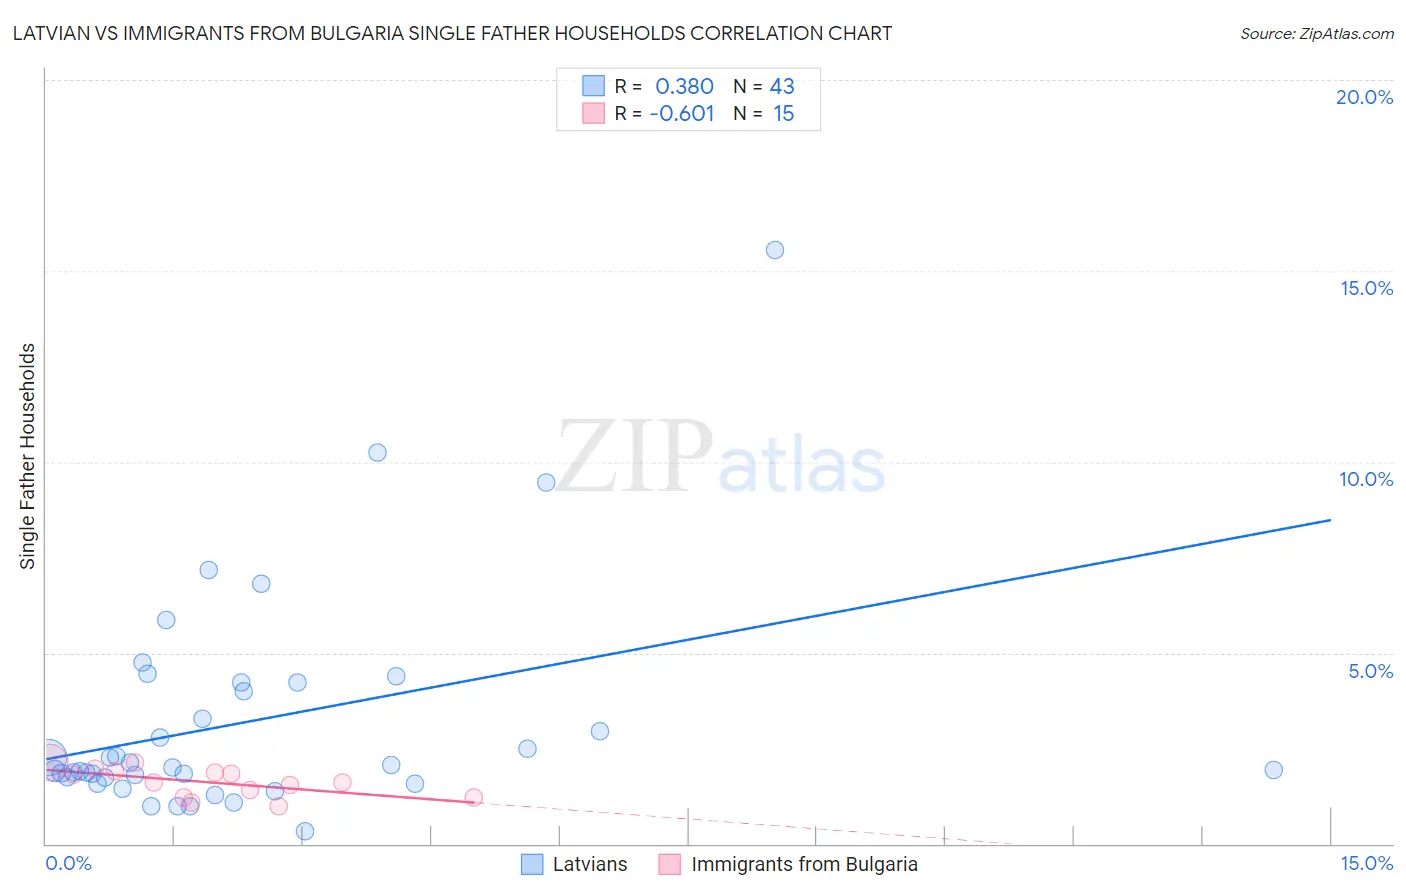 Latvian vs Immigrants from Bulgaria Single Father Households